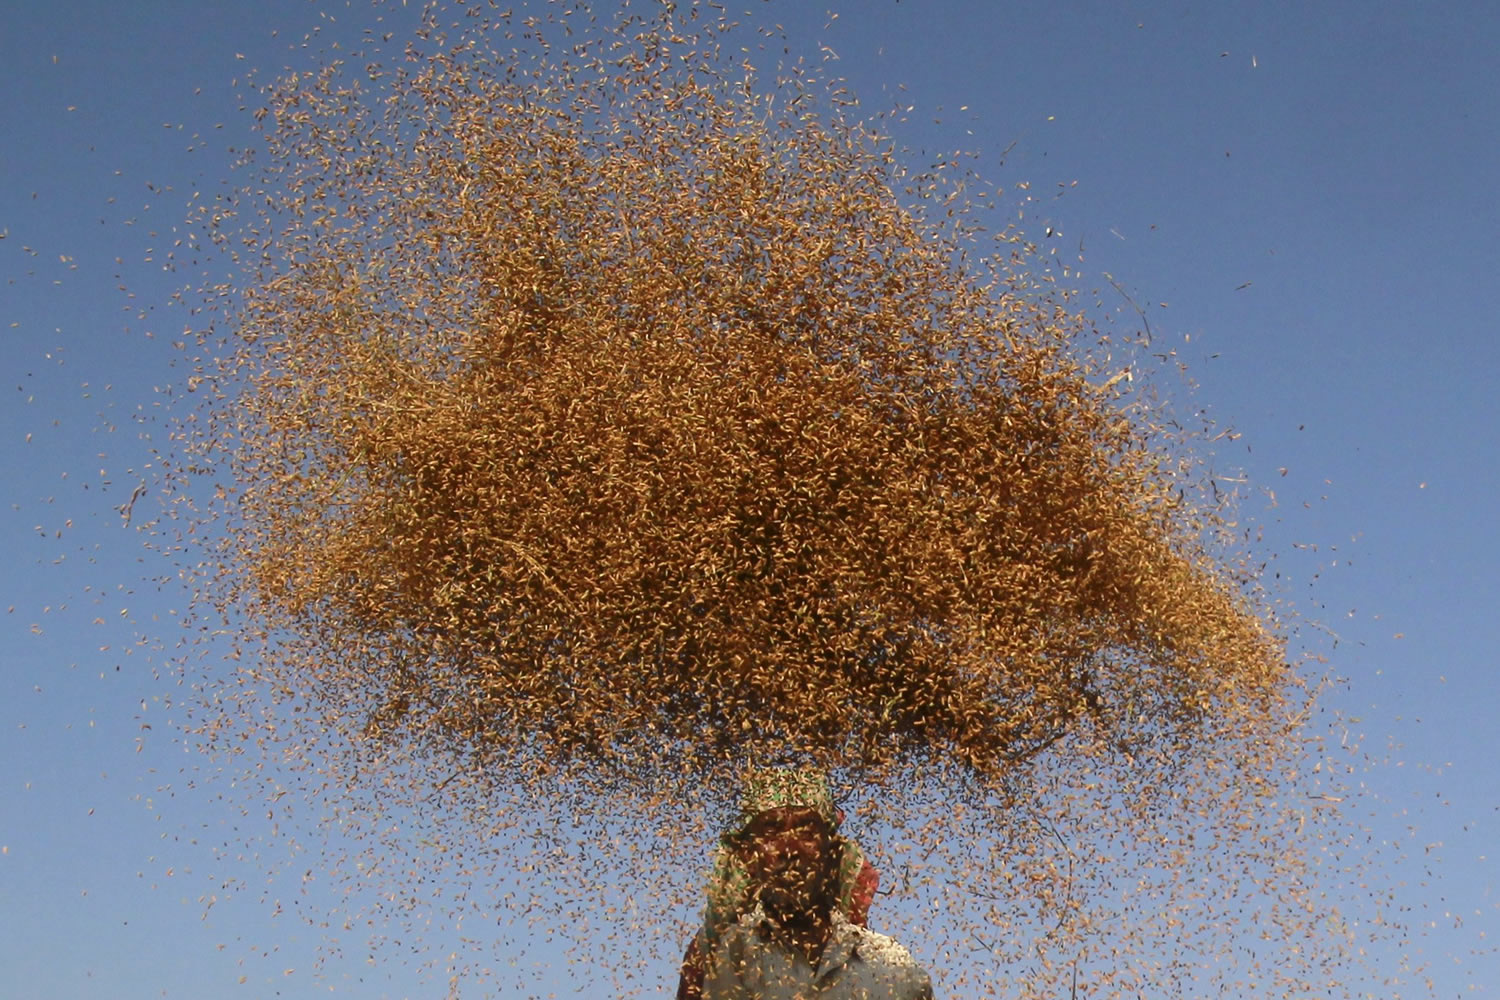 India tries to stop farmer suicide epidemic: over 800 in 10 months